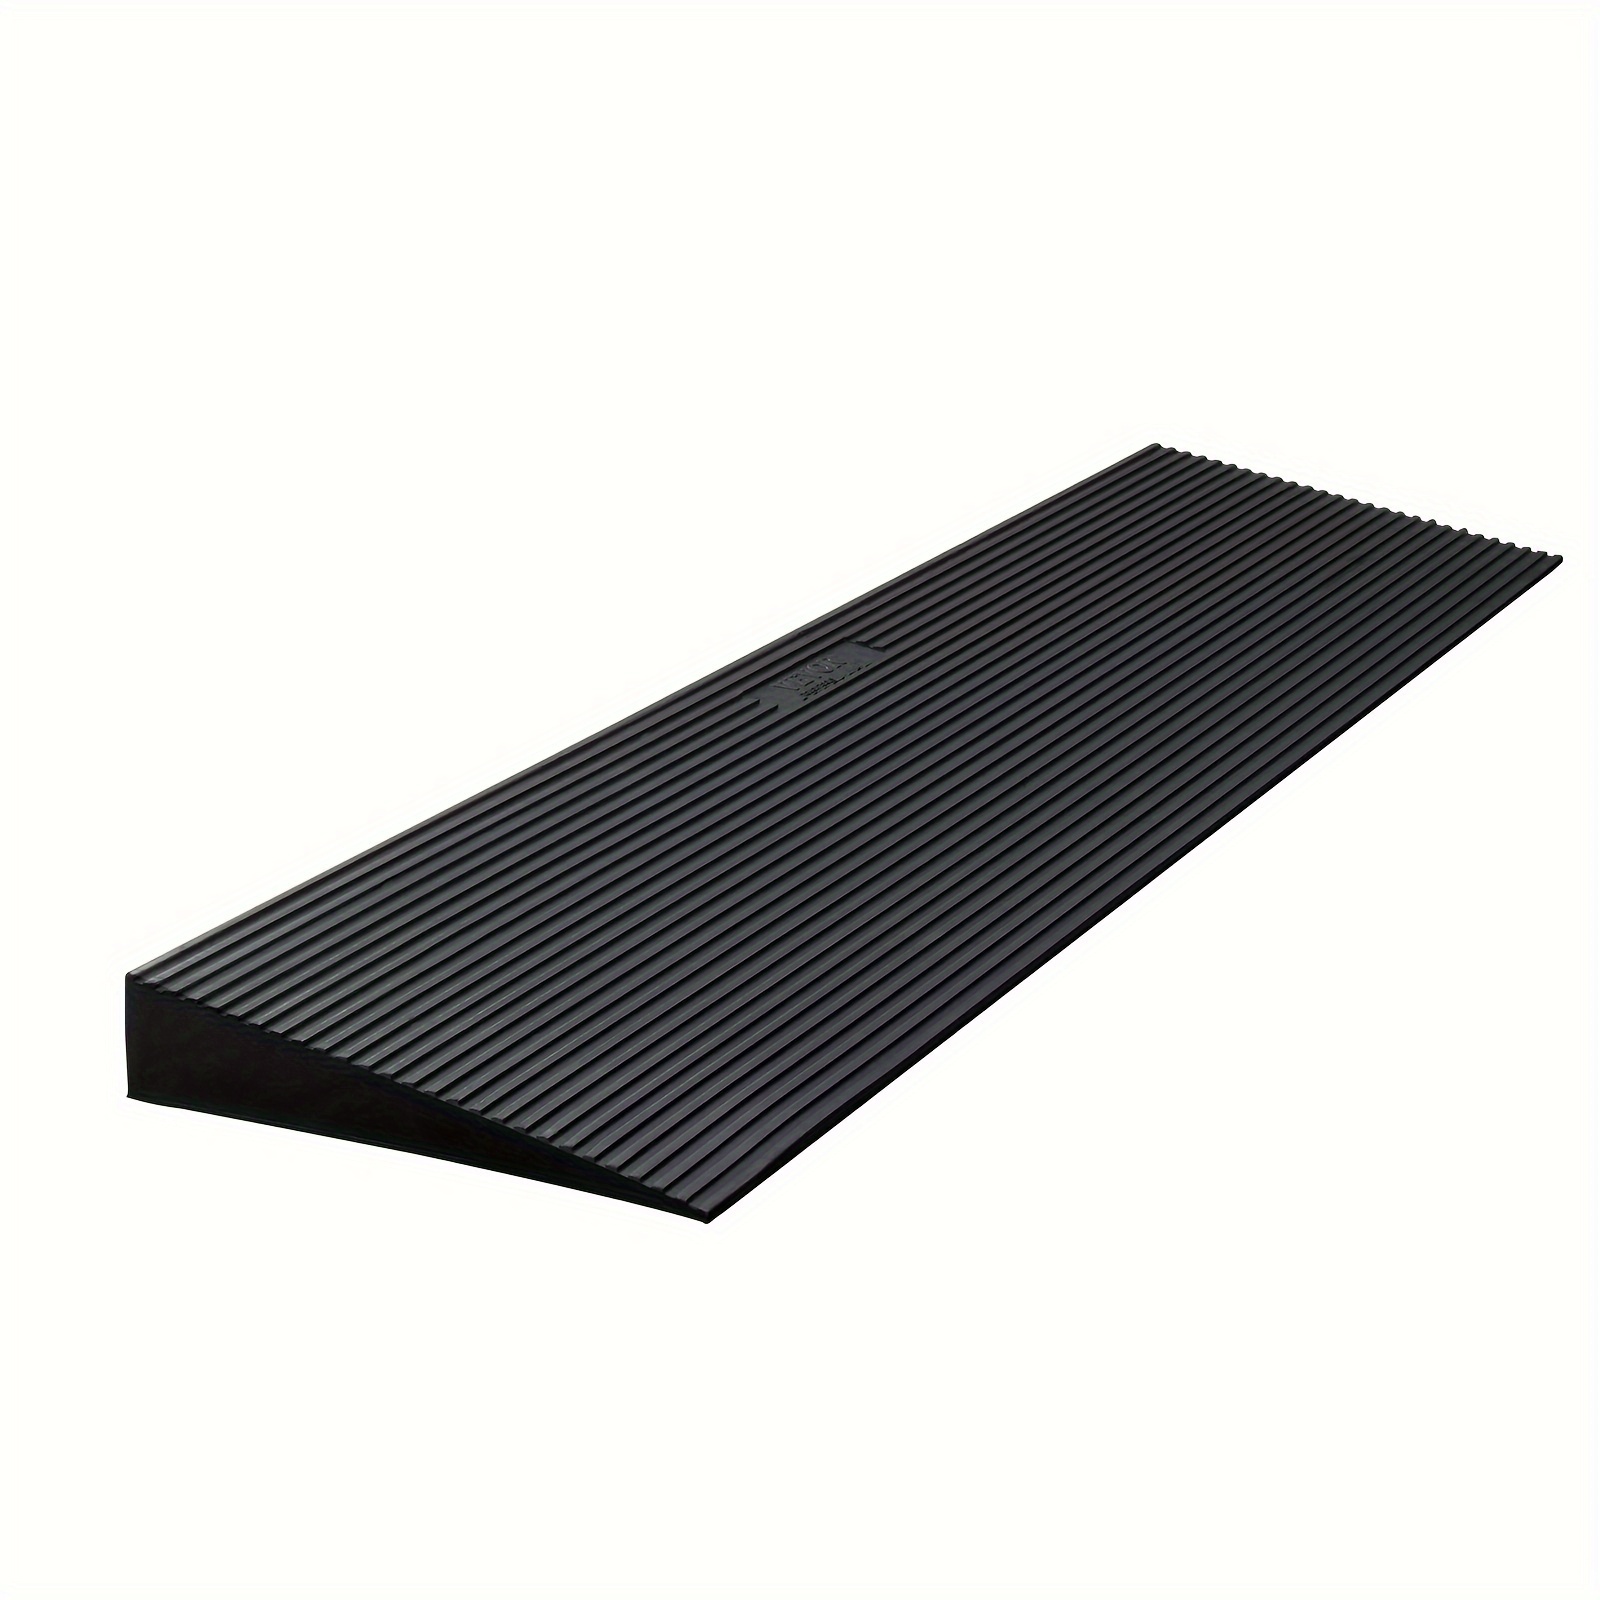 

Rise Cuttable Threshold Ramp For Sweeping Robot, 35.4" Wide Natural Rubber Wheelchair Ramp, Non-slip Solid Rubber Ramp With Double-sided Tape For Doorways, Driveways, Bathroom, Smooth Tile